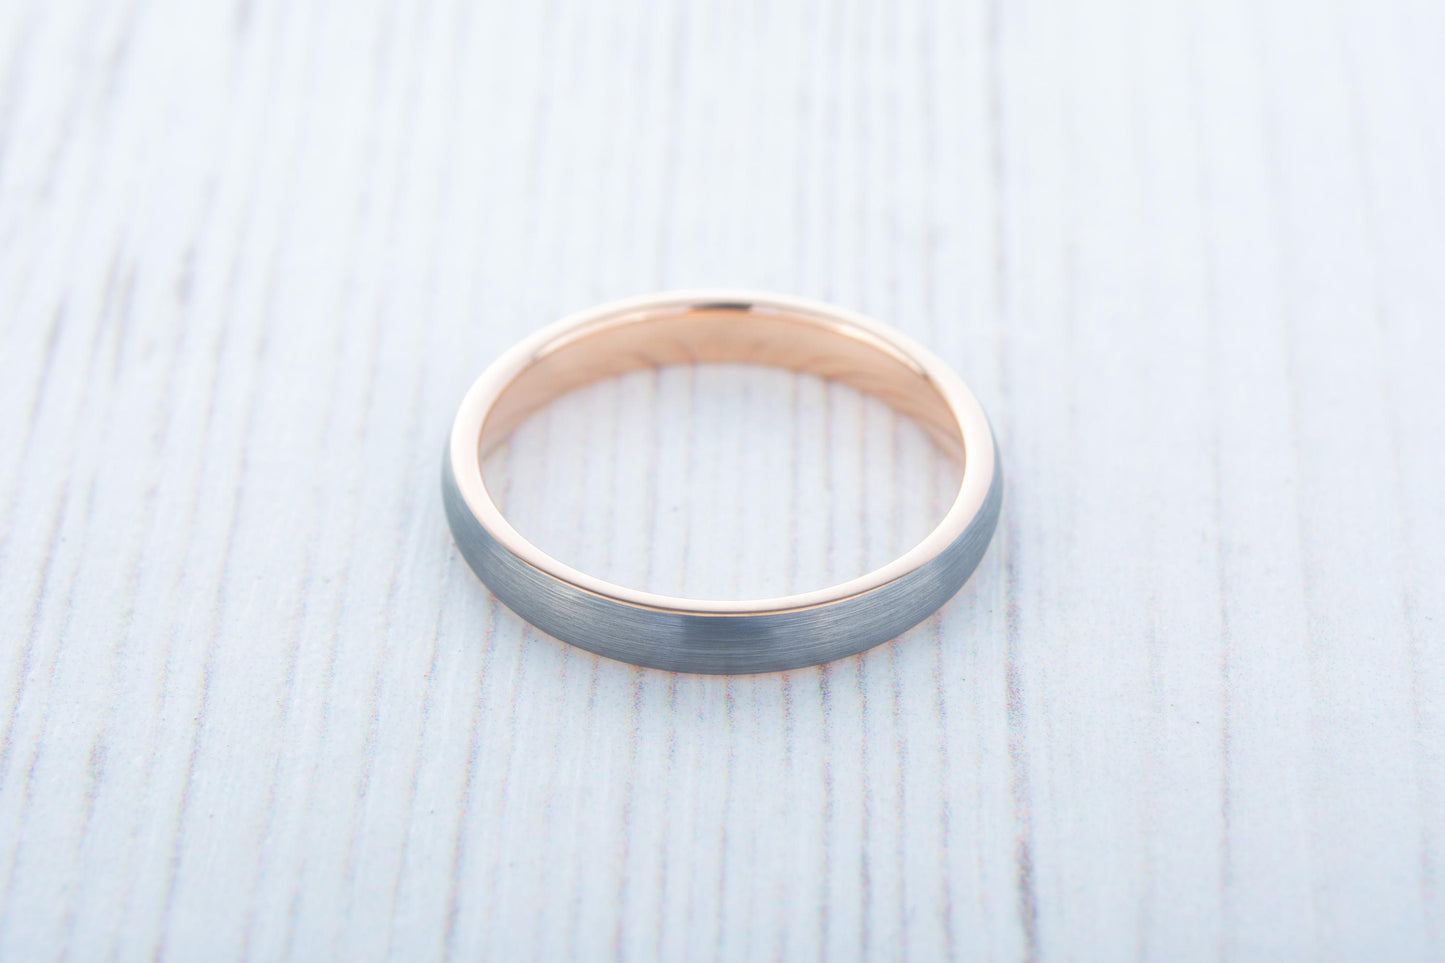 3mm 14K Rose Gold and Brushed Titanium Wedding ring band for men and women